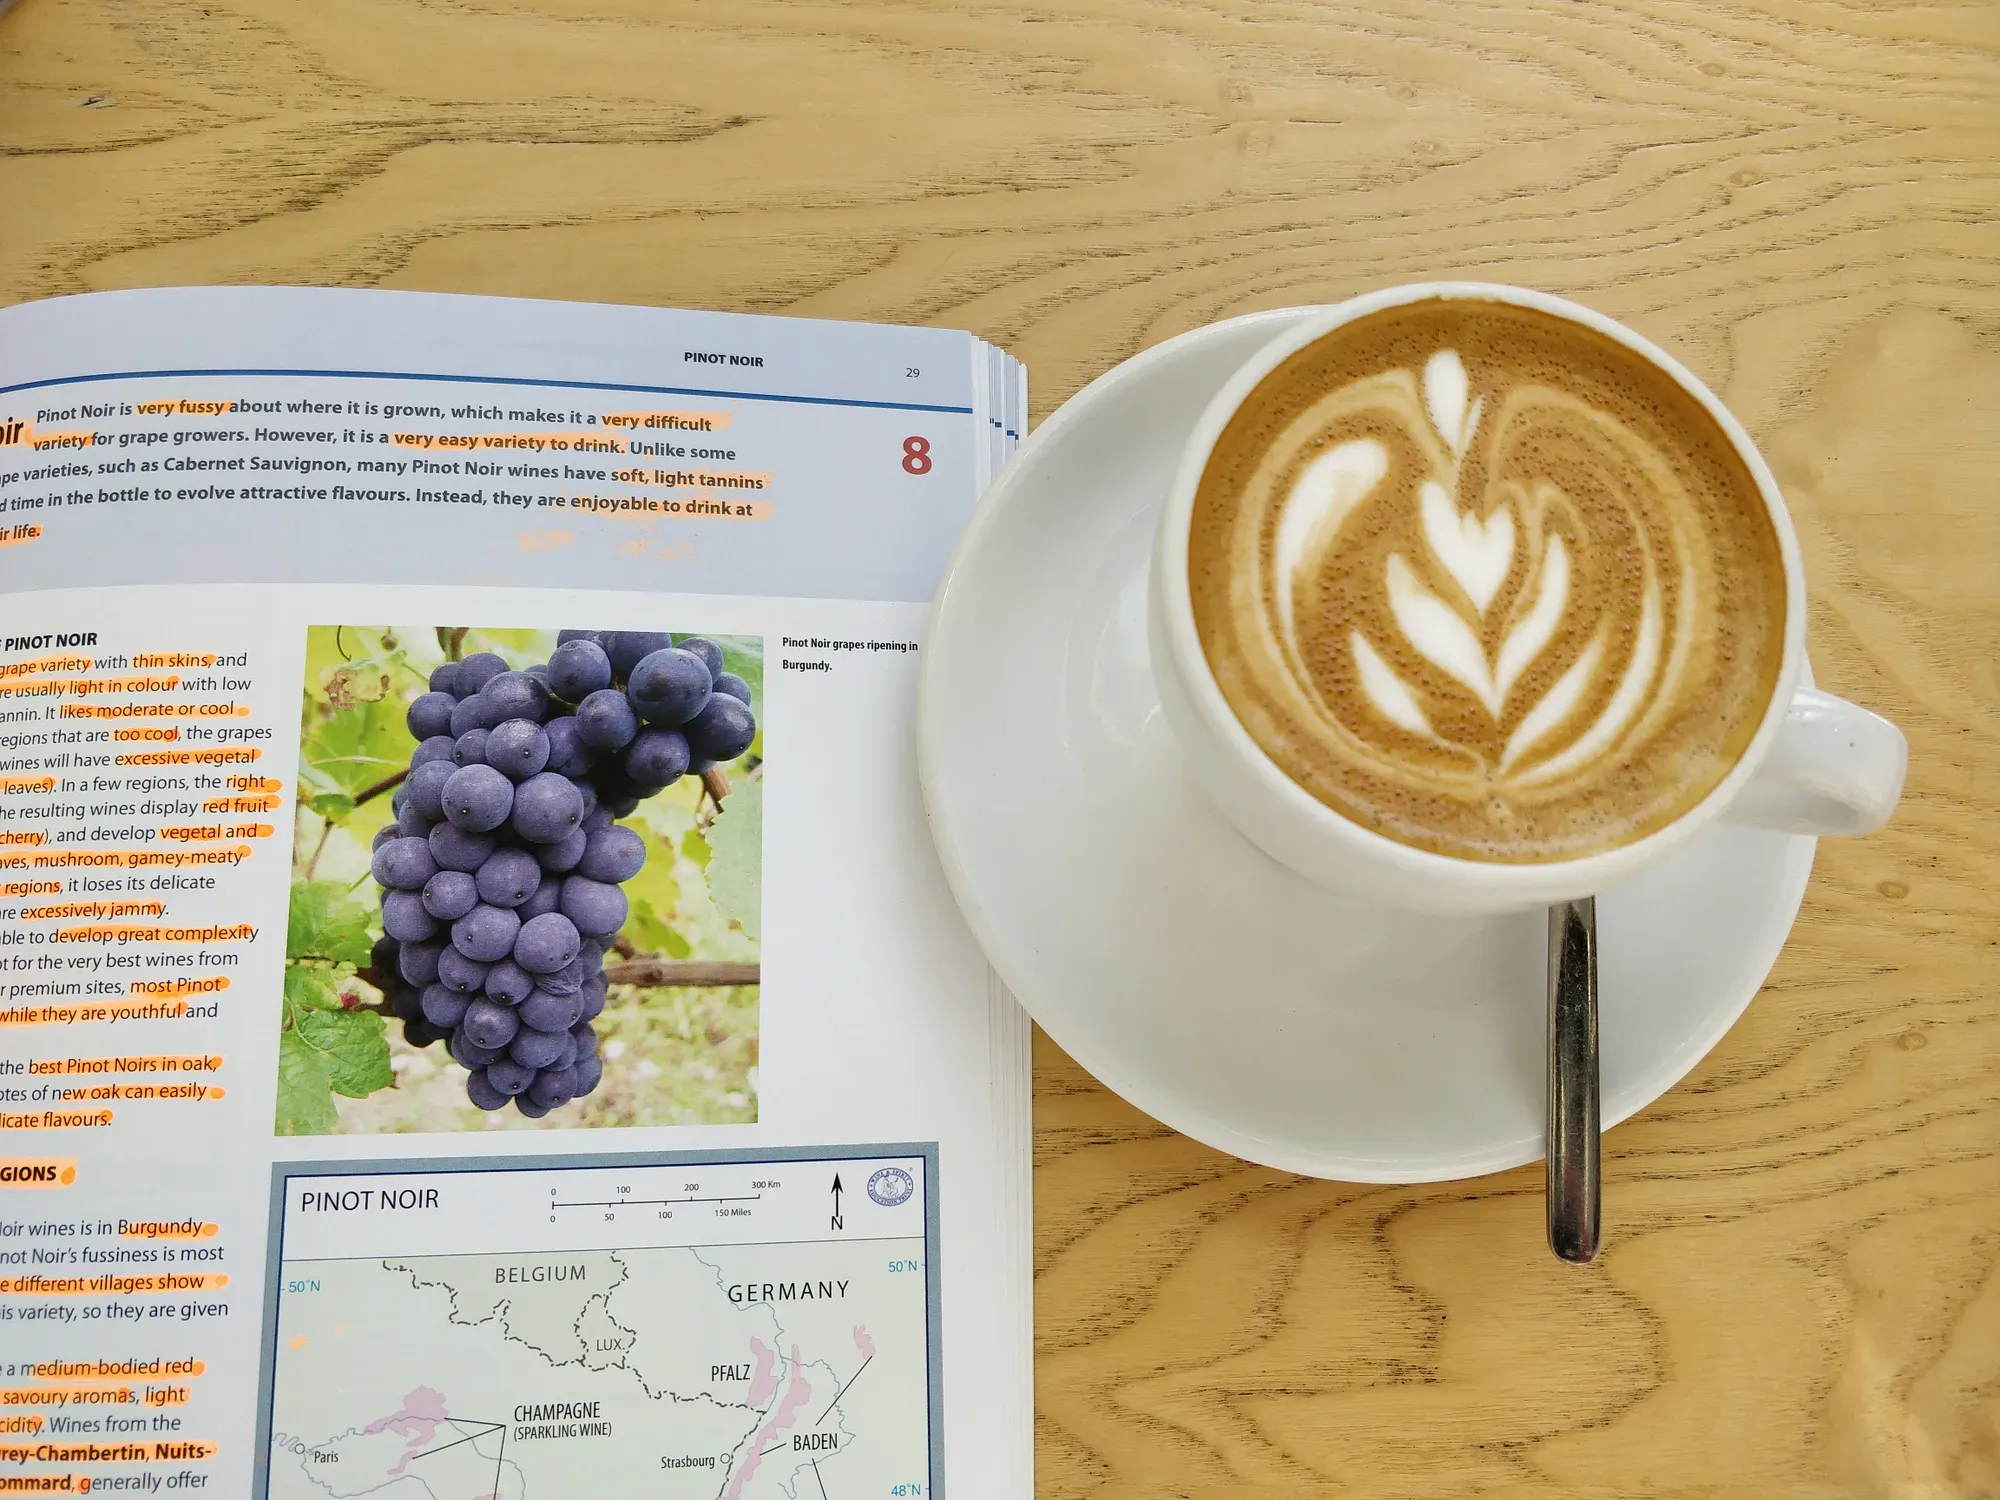 WSET Level 2 study book with higlighted text and a cup of coffee